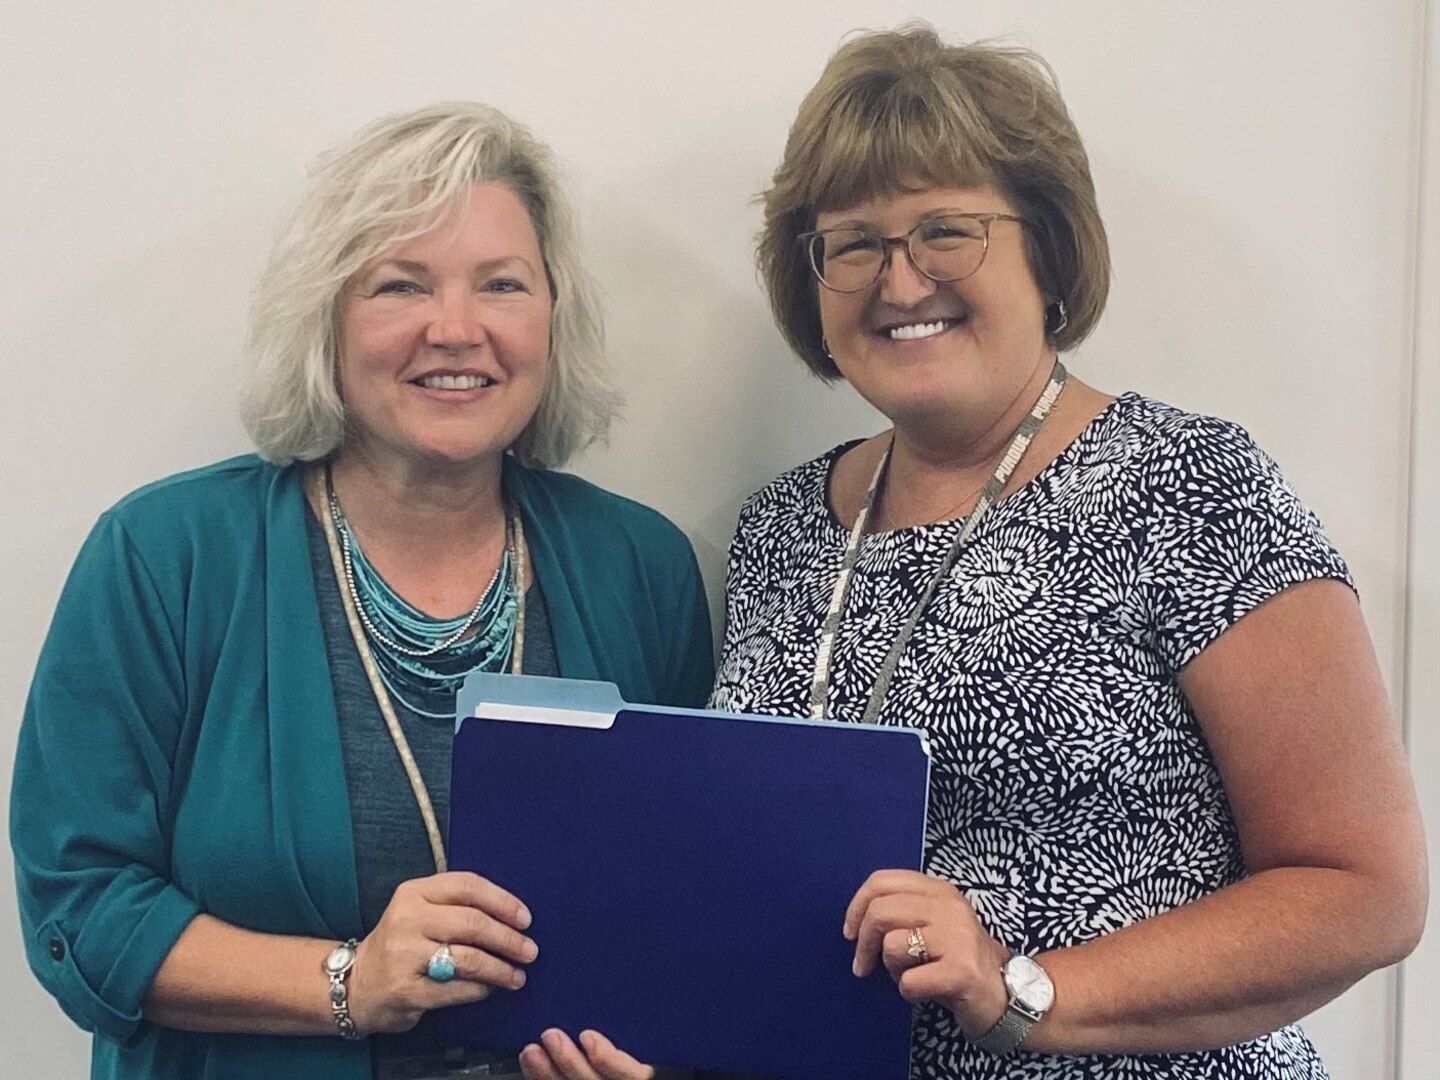 Maureen Sims-Strong was awarded the Navy Civilian Service Achievement Medal, which is the fifth highest Navy civilian award, due to her role as the Contracting Officer Representative (COR) Certification Manager (CCM).